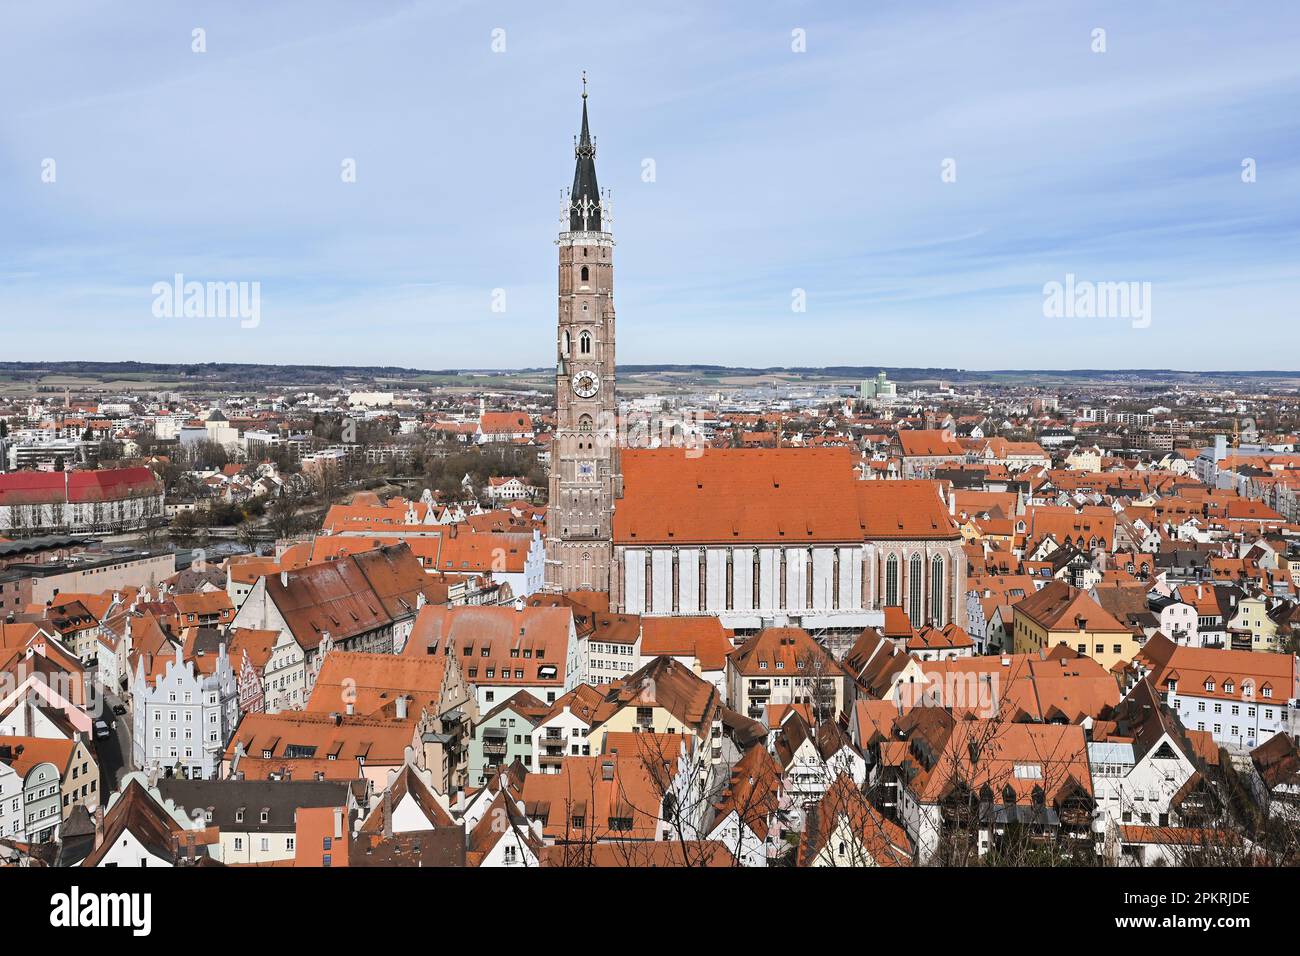 Cityscape of Landshut in Lower Bavaria, Germany. Town centre with St. Martin's Church. Stock Photo